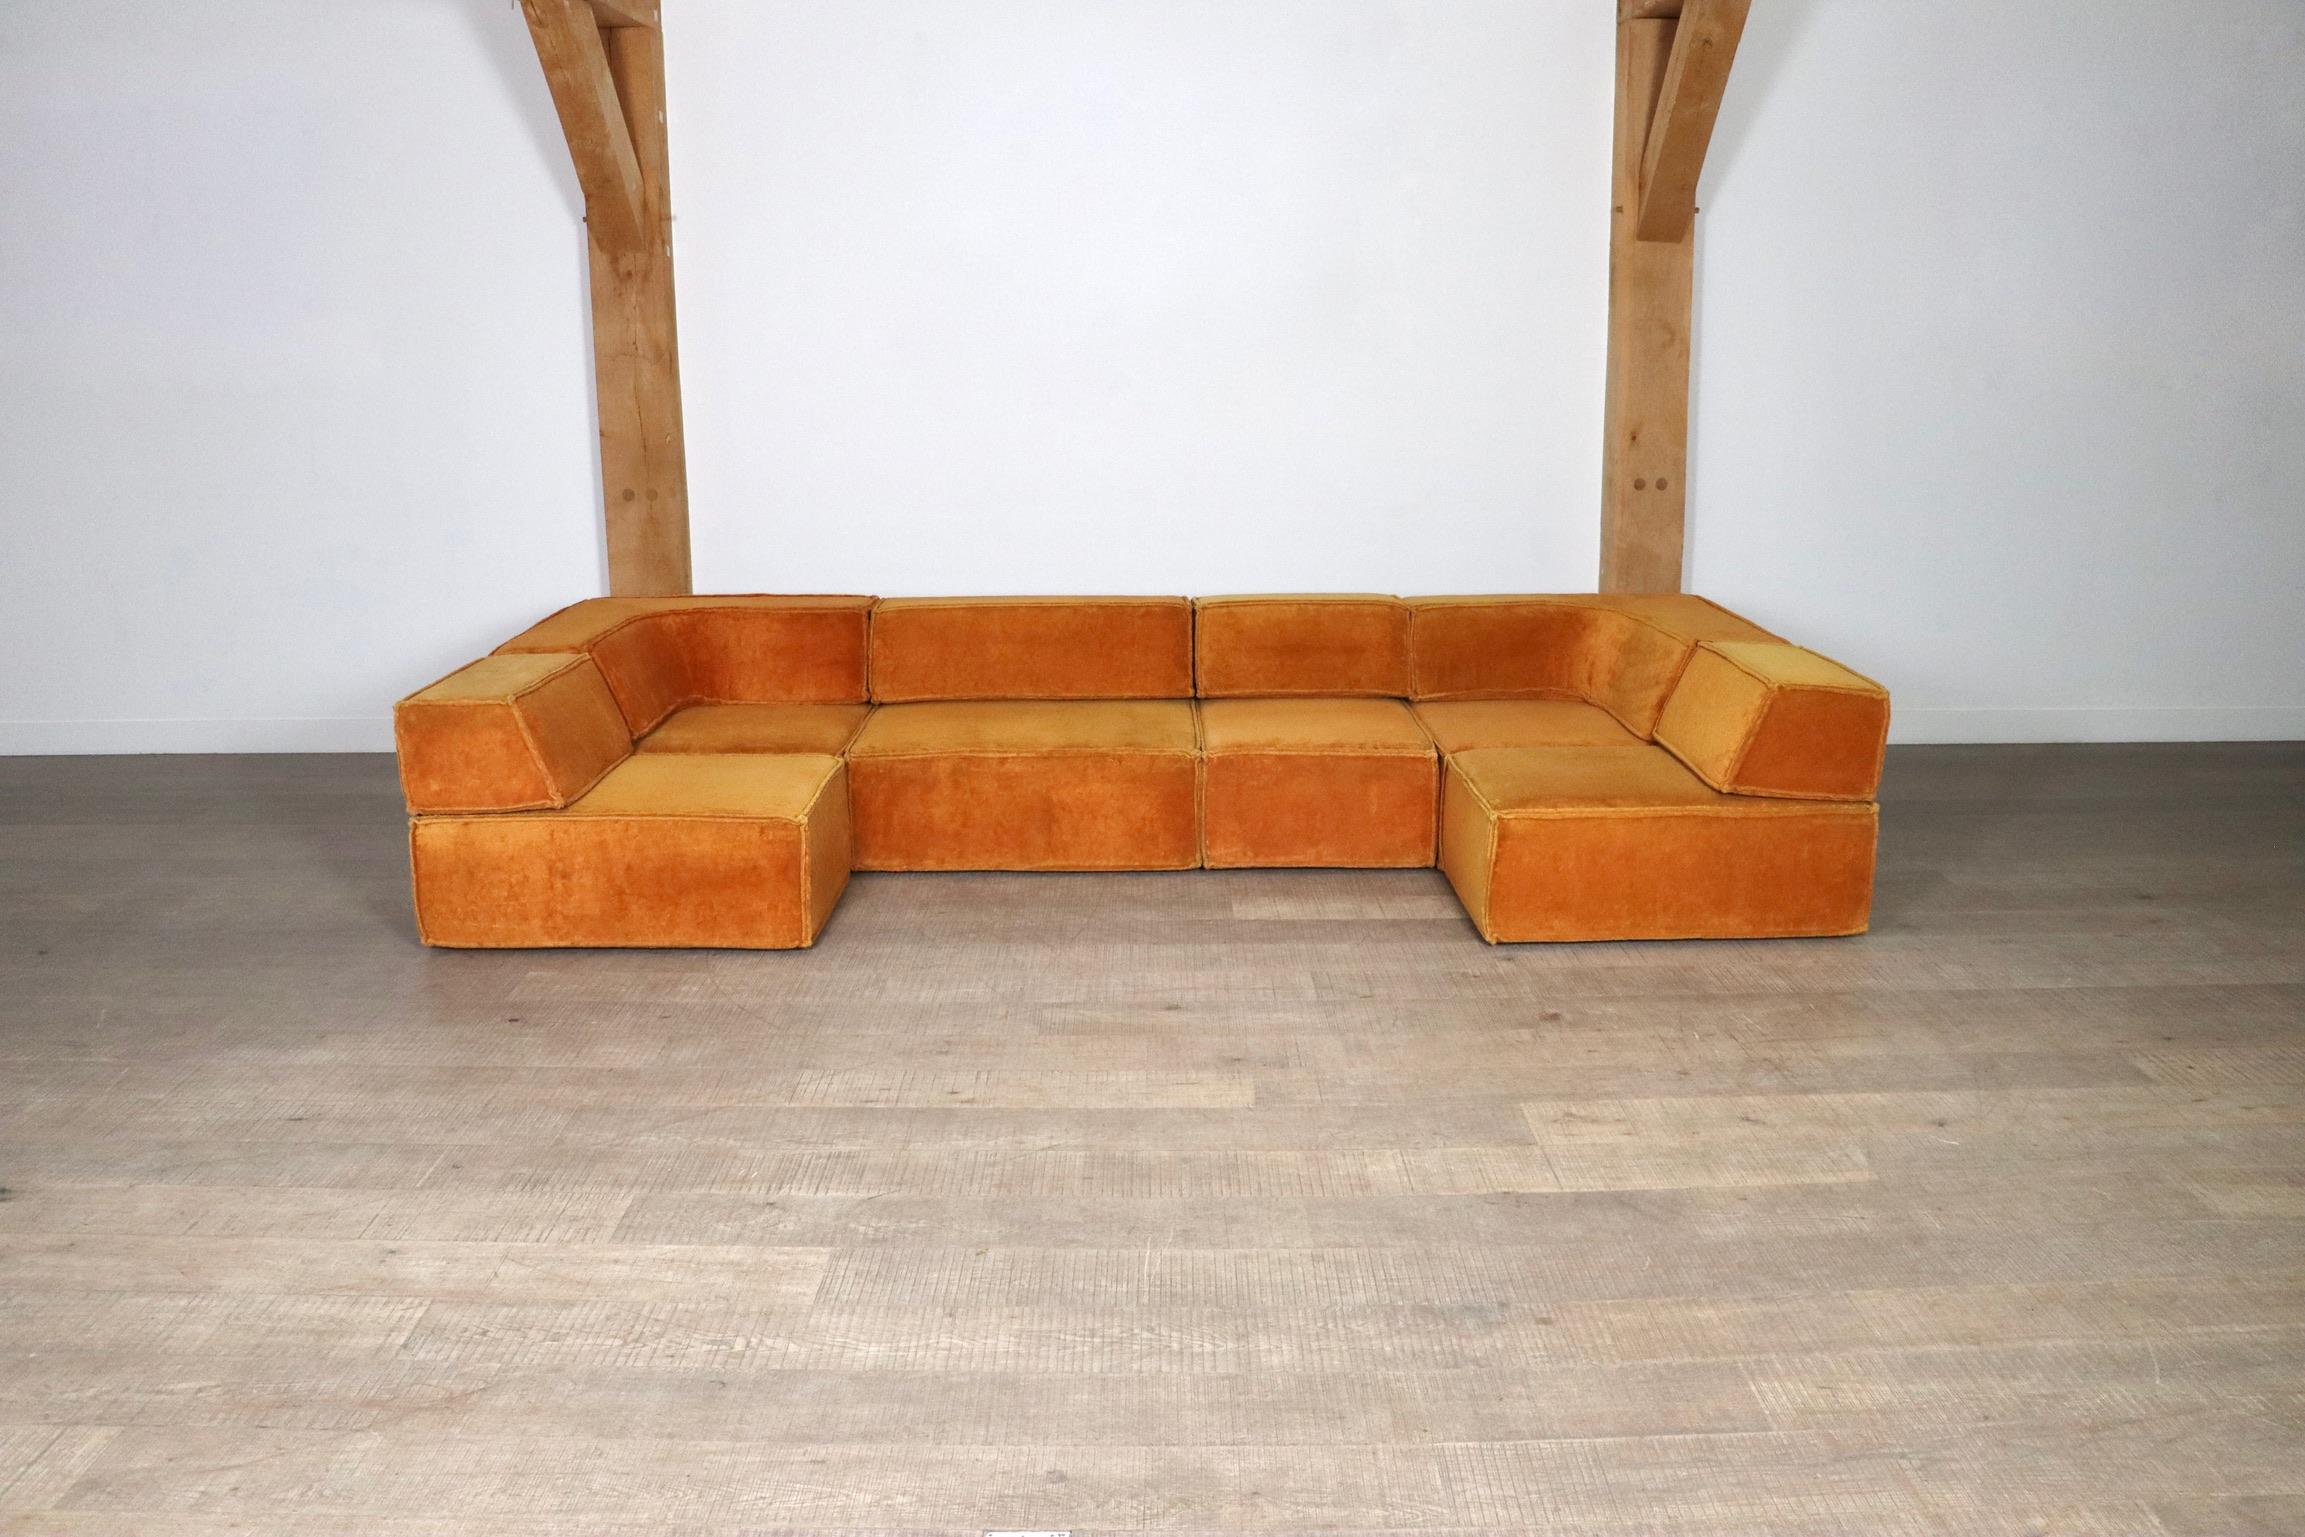 The iconic modular sofa COR trio, executed in a stunning orange teddy fabric. The Cor Trio design was created in 1972 by Team Form AG in Switzerland for COR, and is still popular today due to its timeless design and high comfort.

This sofa consists